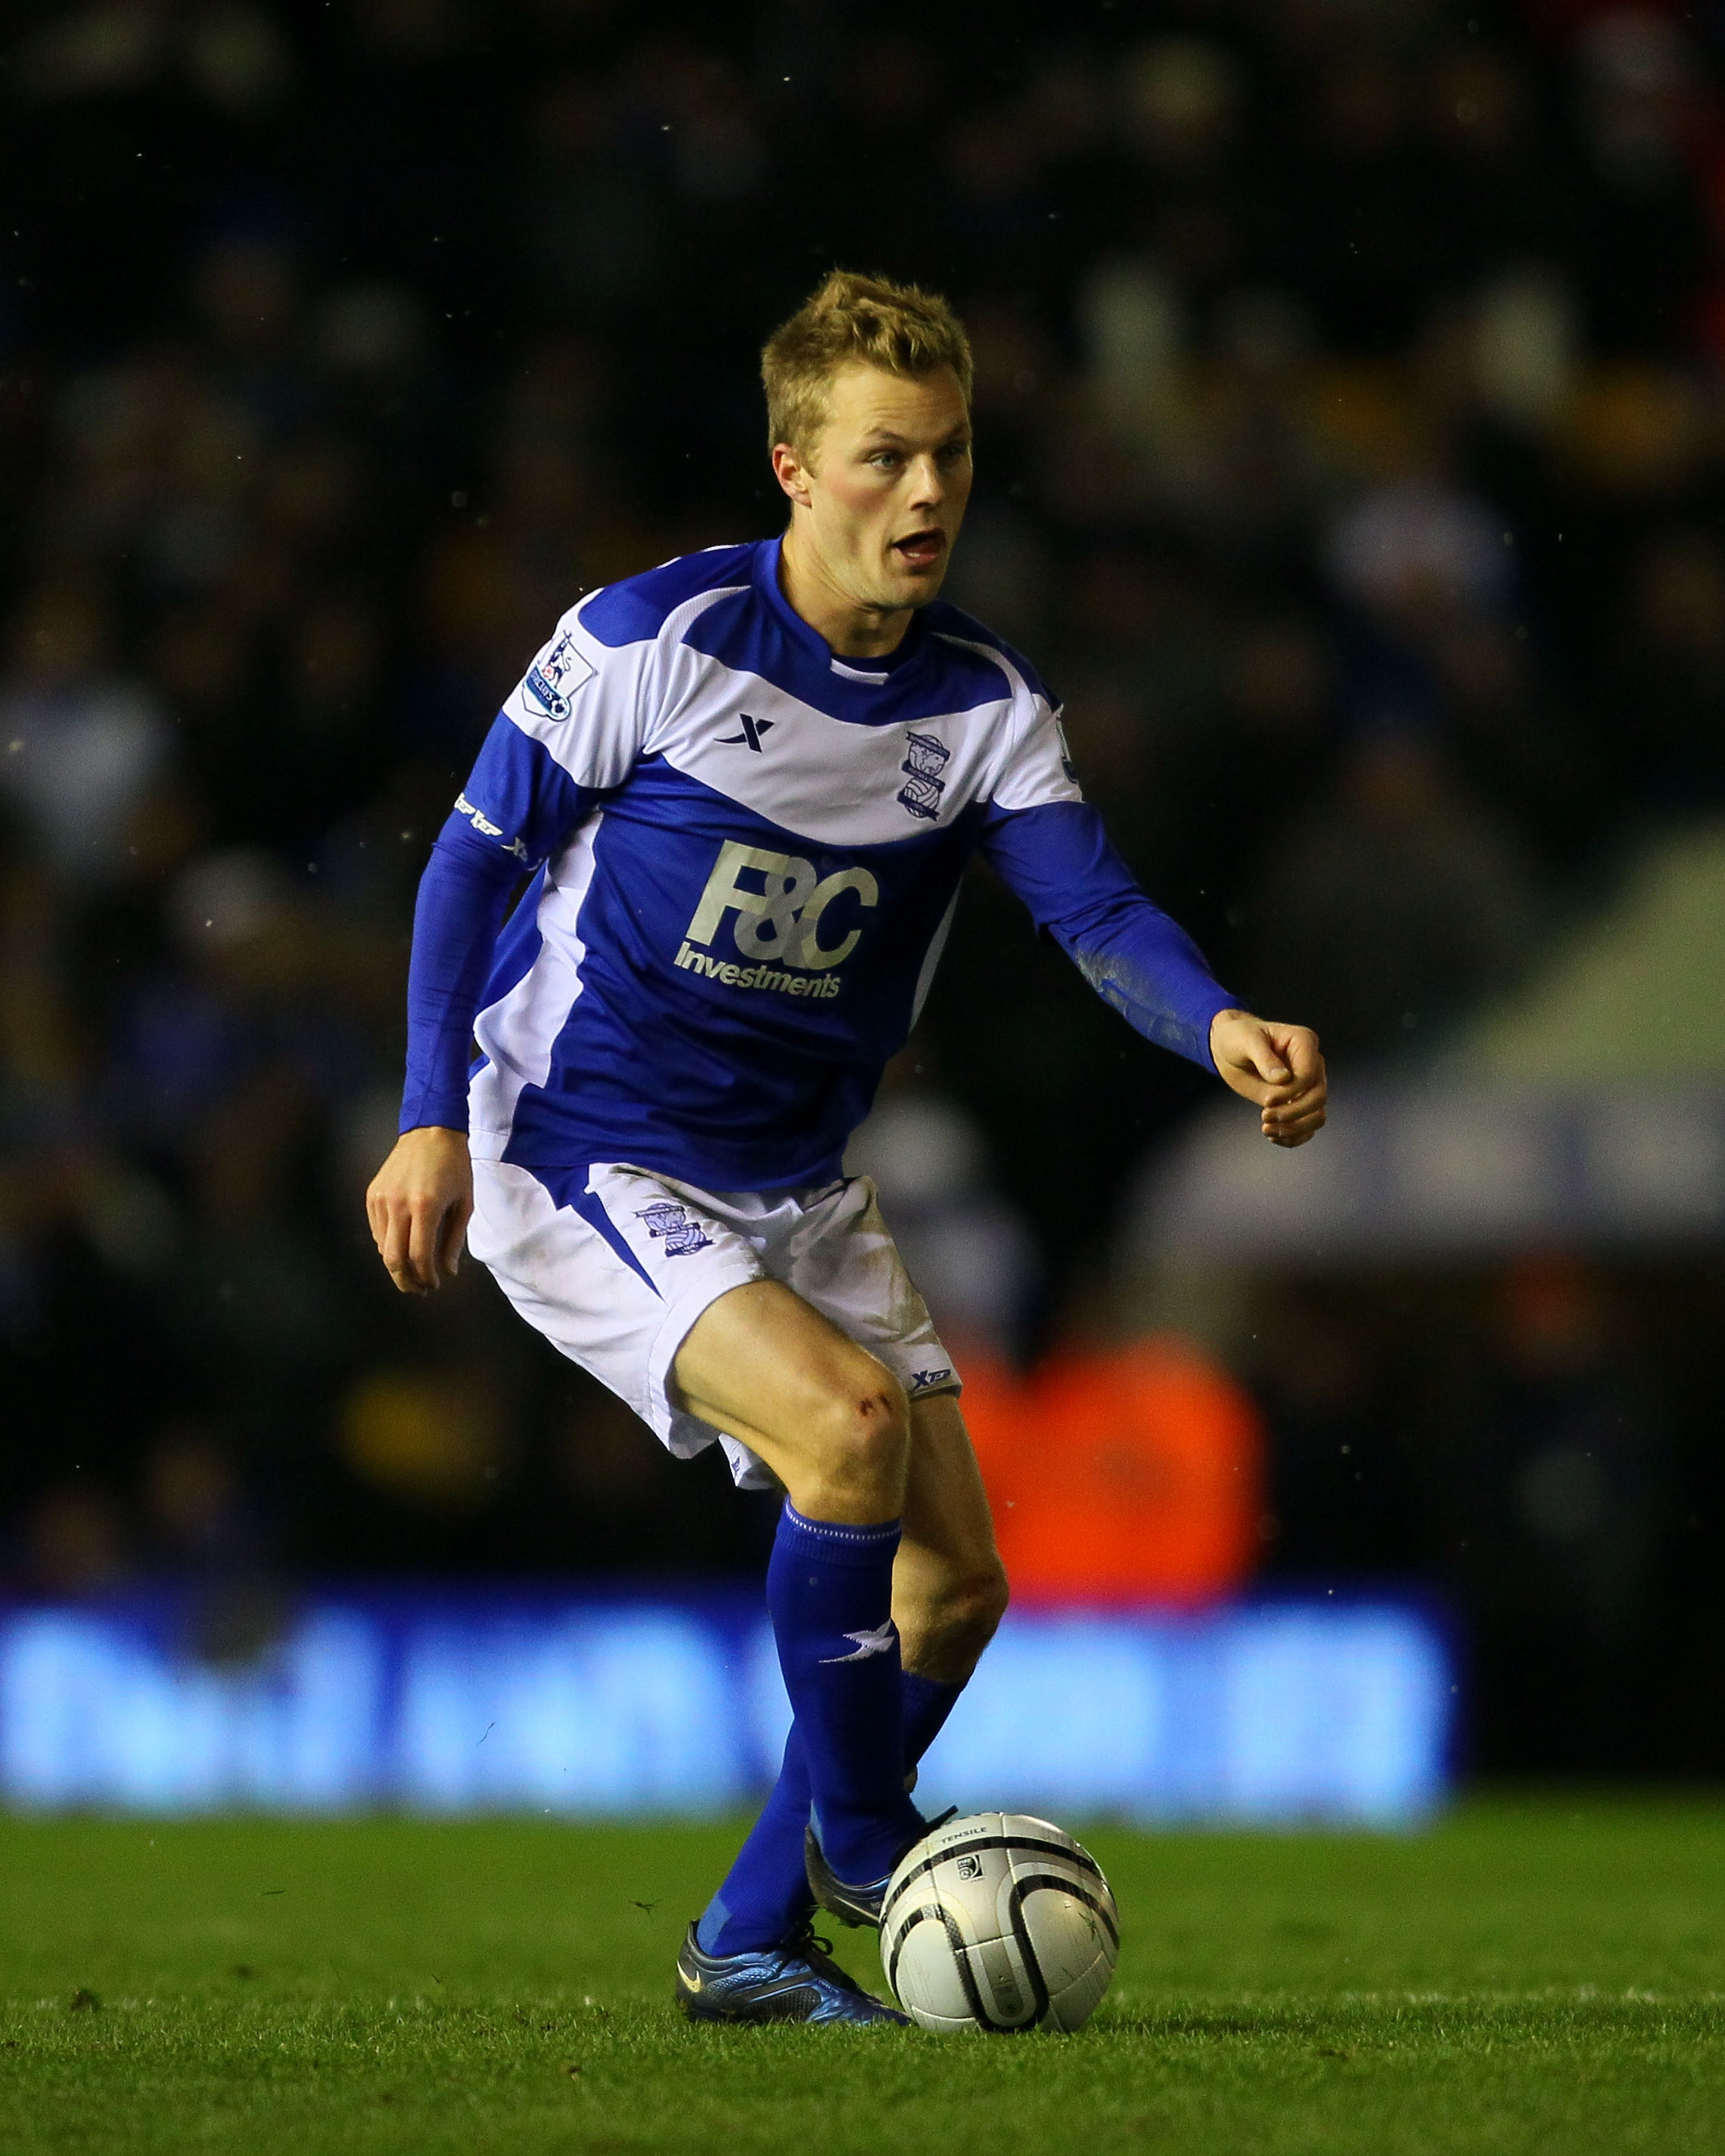 BIRMINGHAM, ENGLAND - DECEMBER 01:  Birmingham forward Sebastian Larsson in action during the Carling Cup Quarter Final between Birmingham City and Aston Villa at St Andrews on December 1, 2010 in Birmingham, England.  (Photo by Stu Forster/Getty Images)